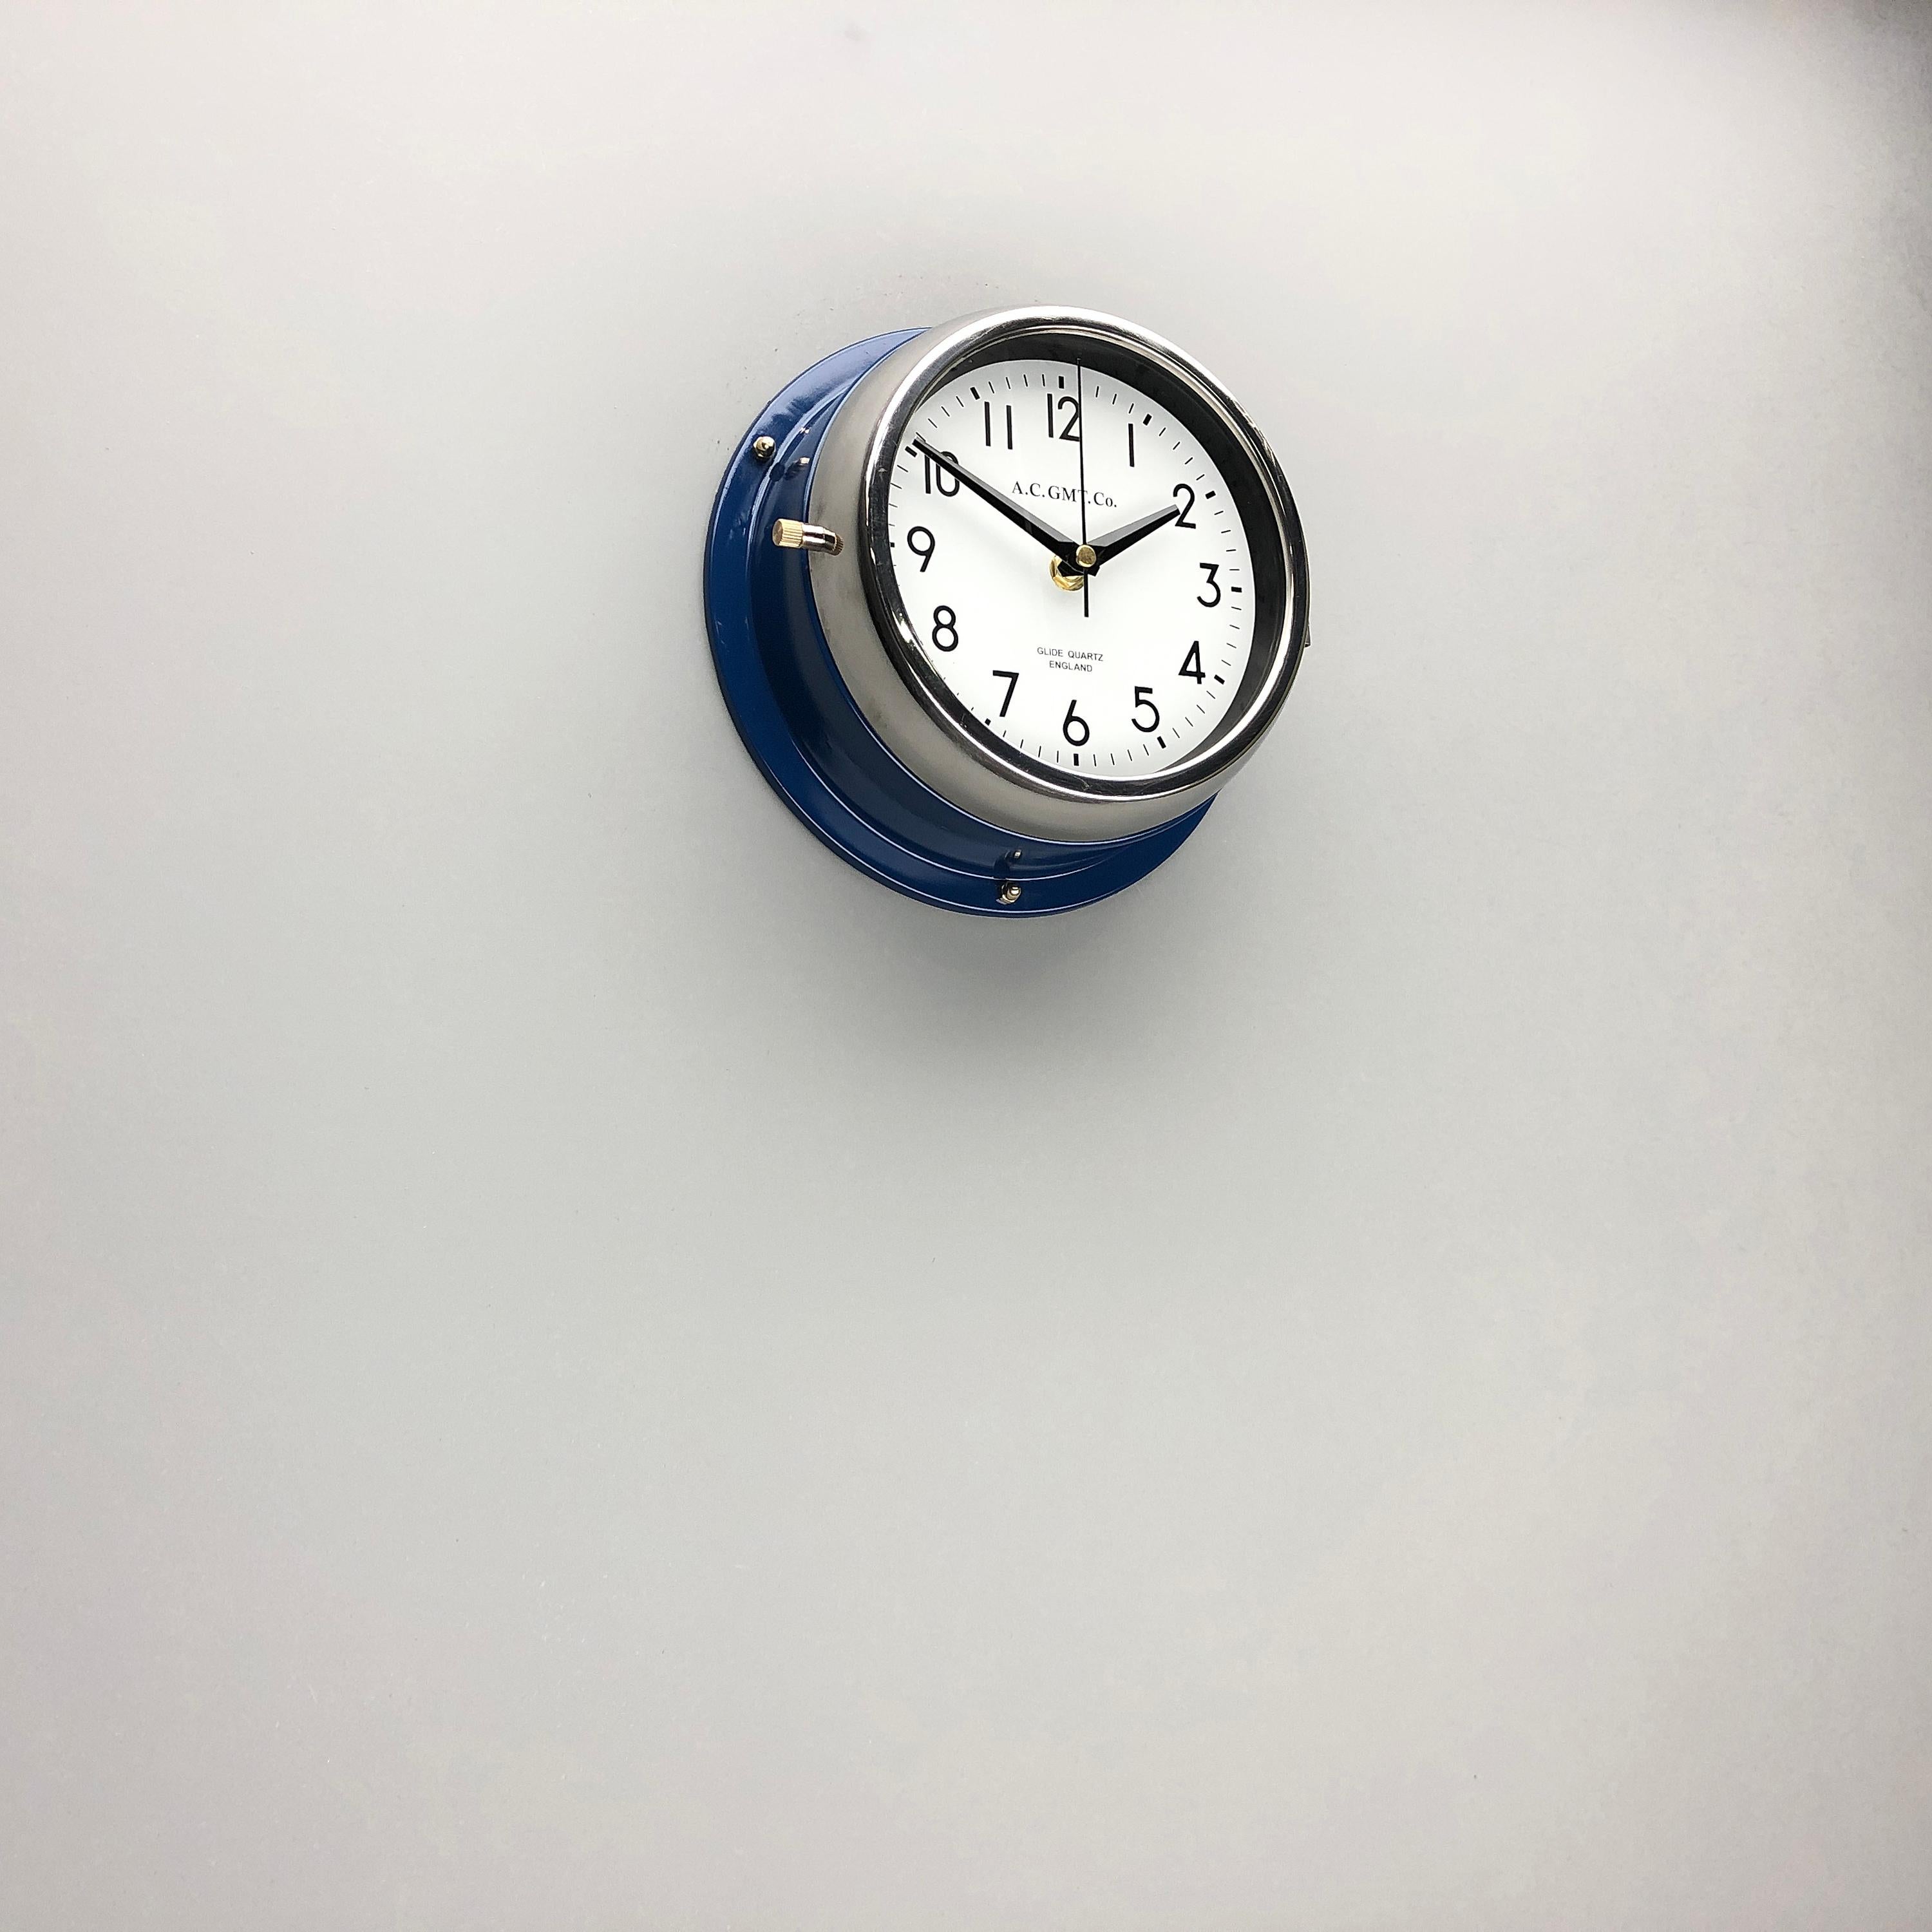 Glazed 1970s British Classic Blue & Chrome Ac Gmt Co. Industrial Wall Clock White Dial For Sale